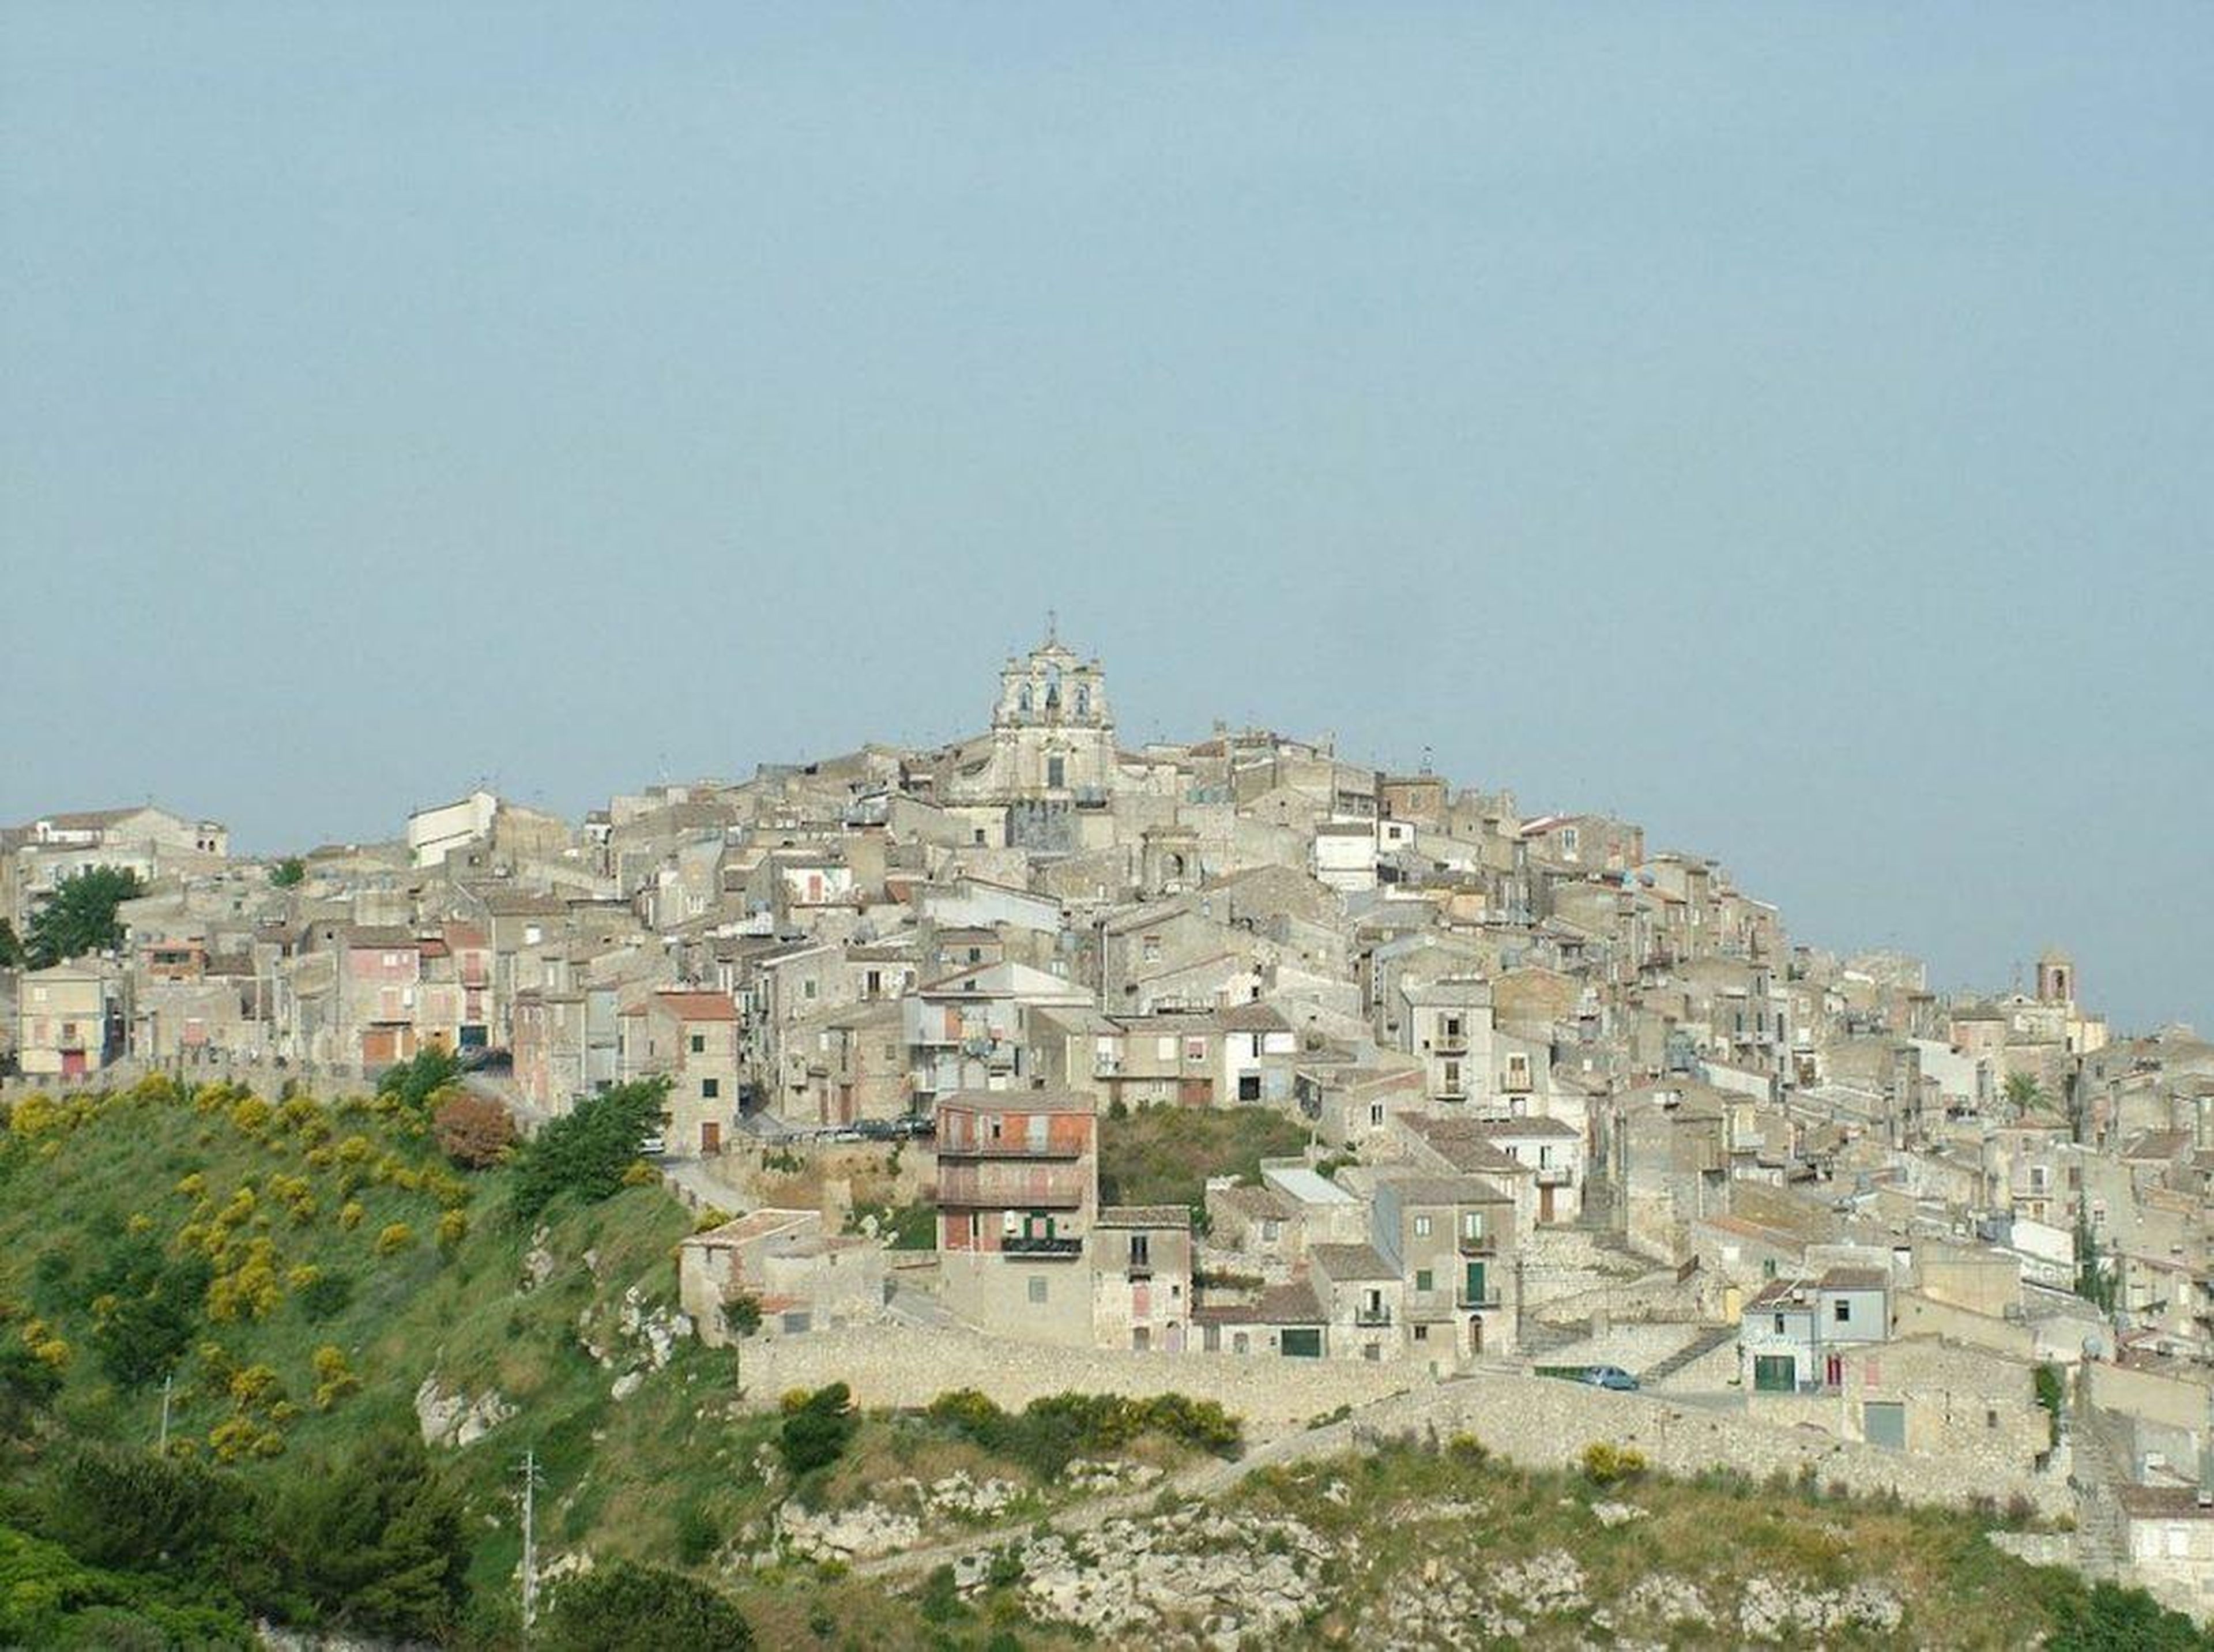 Mussomeli has 11,000 residents, but many of its homes have been deserted as people move to urban areas.